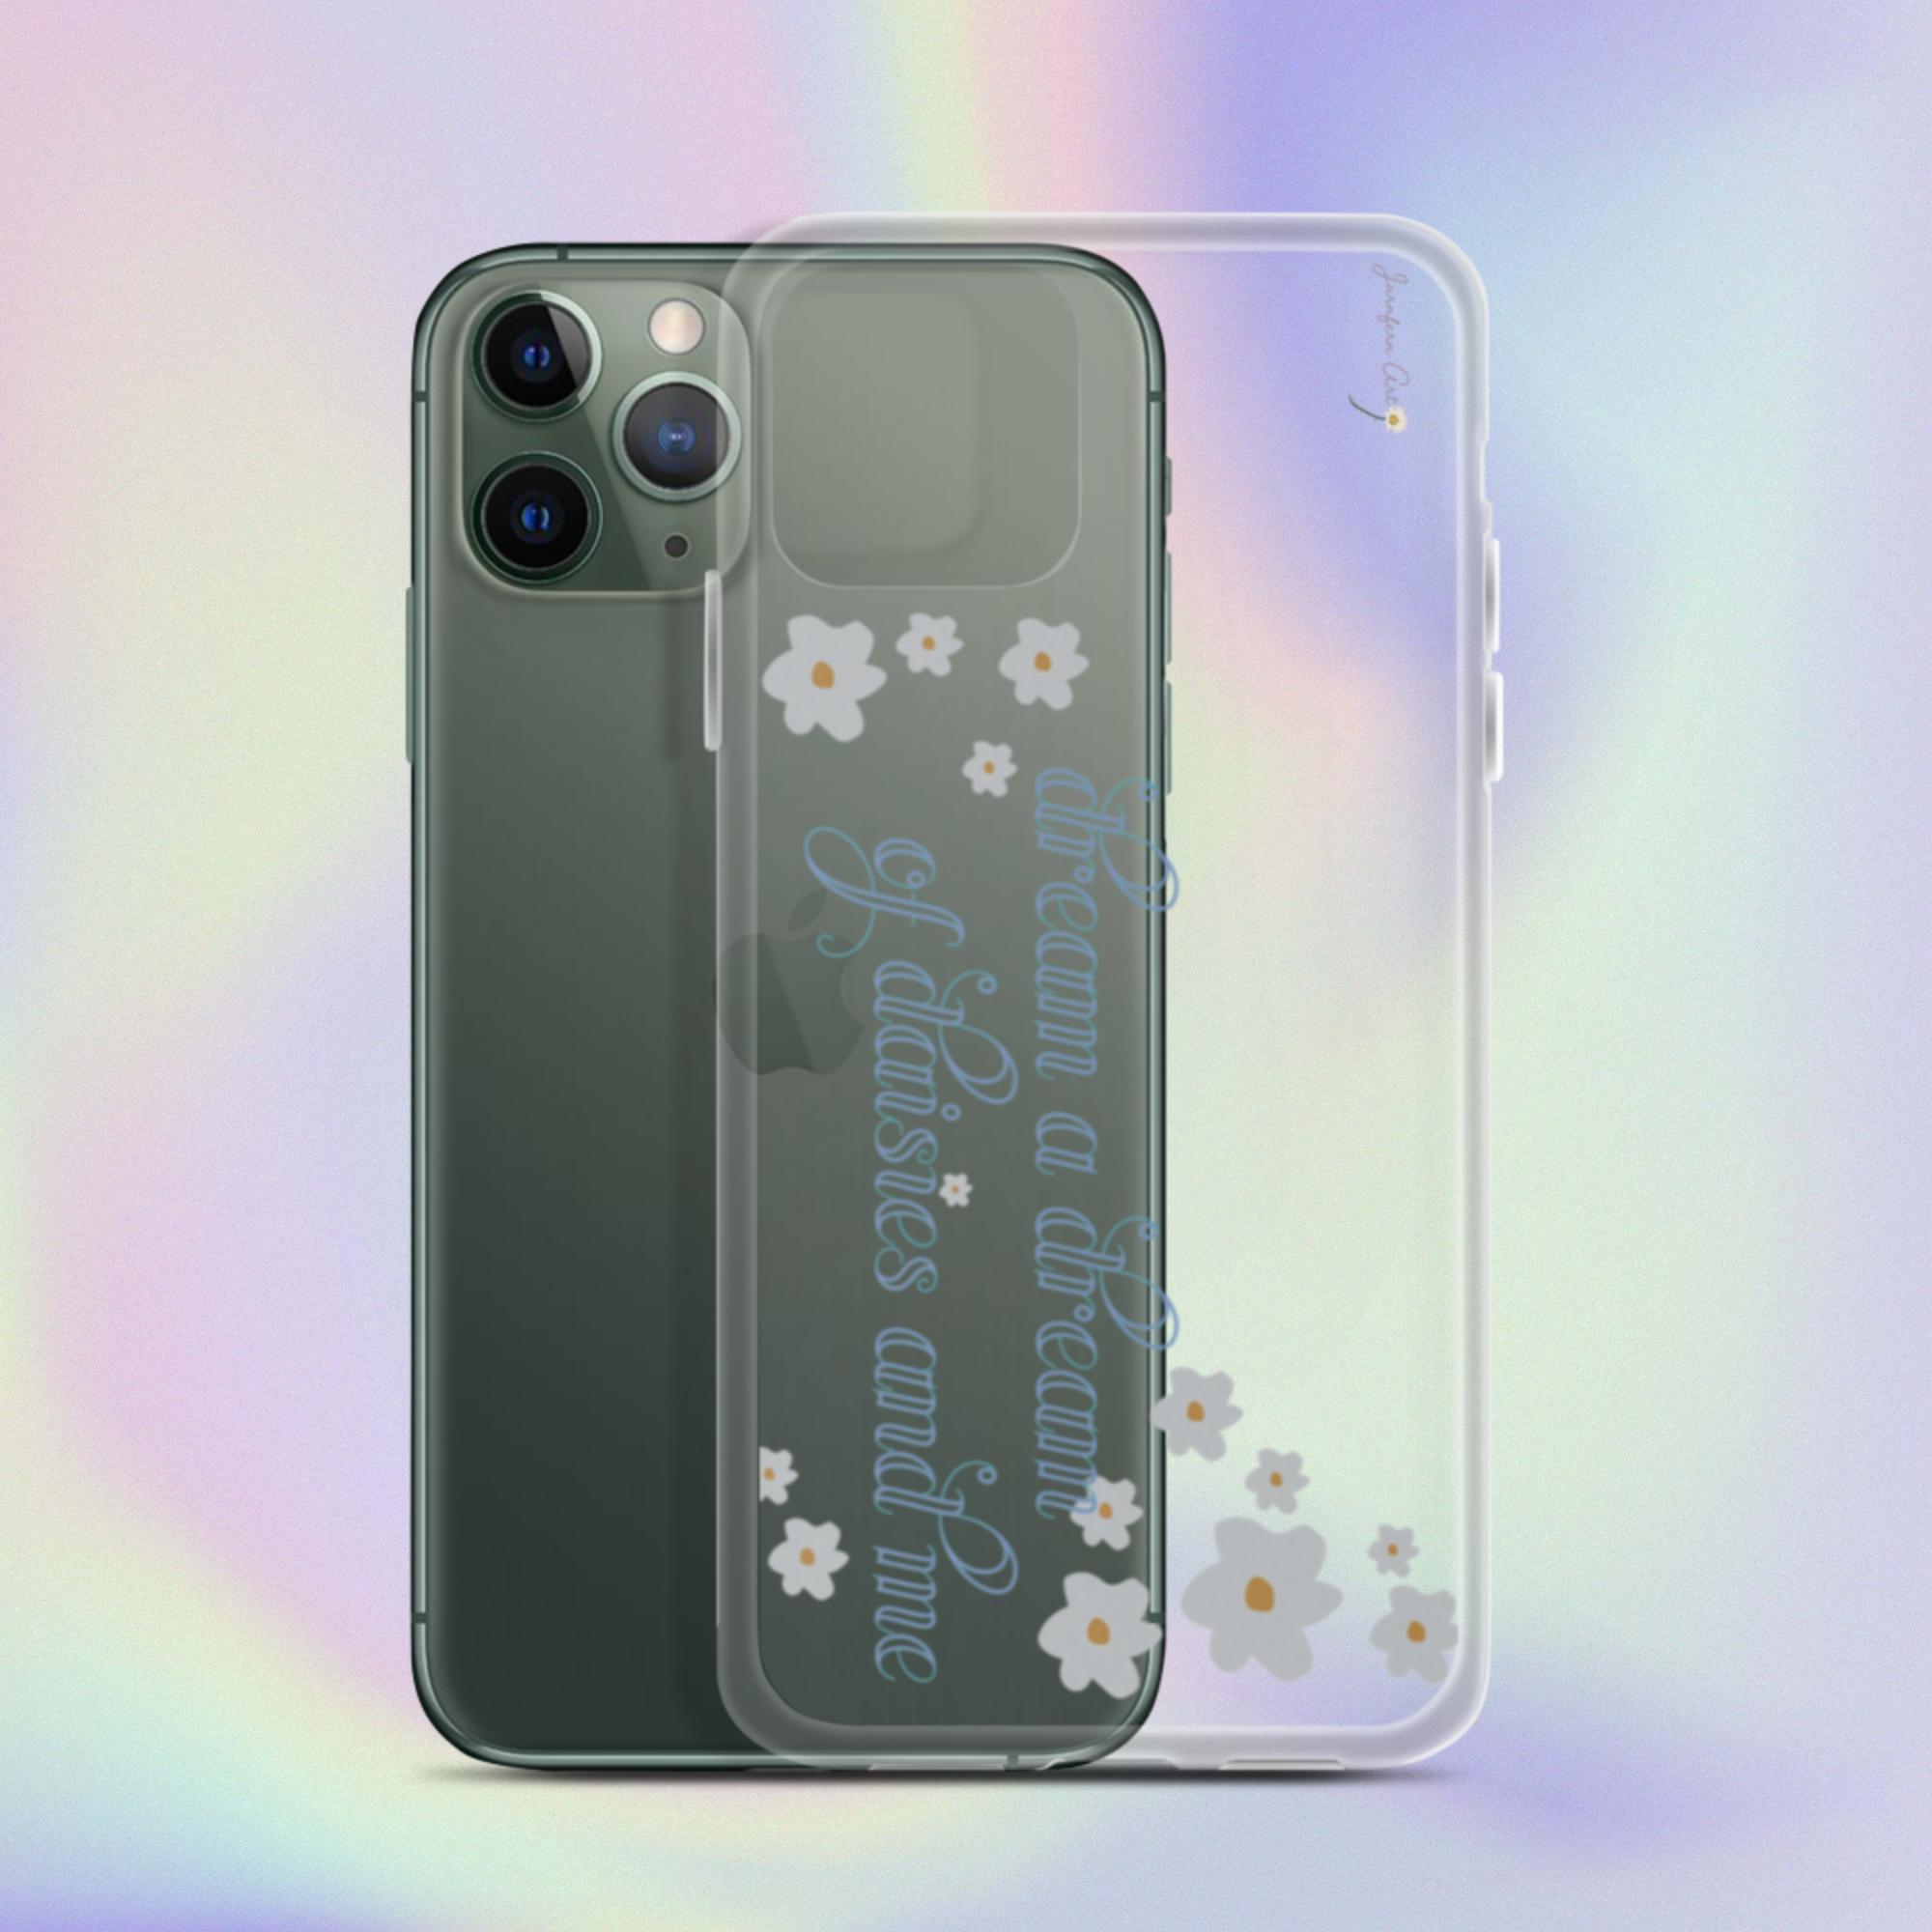 A transparent iPhone 11 Pro case with cursive blue text on it that reads "dream a dream of daisies and me" surrounded by small daisies